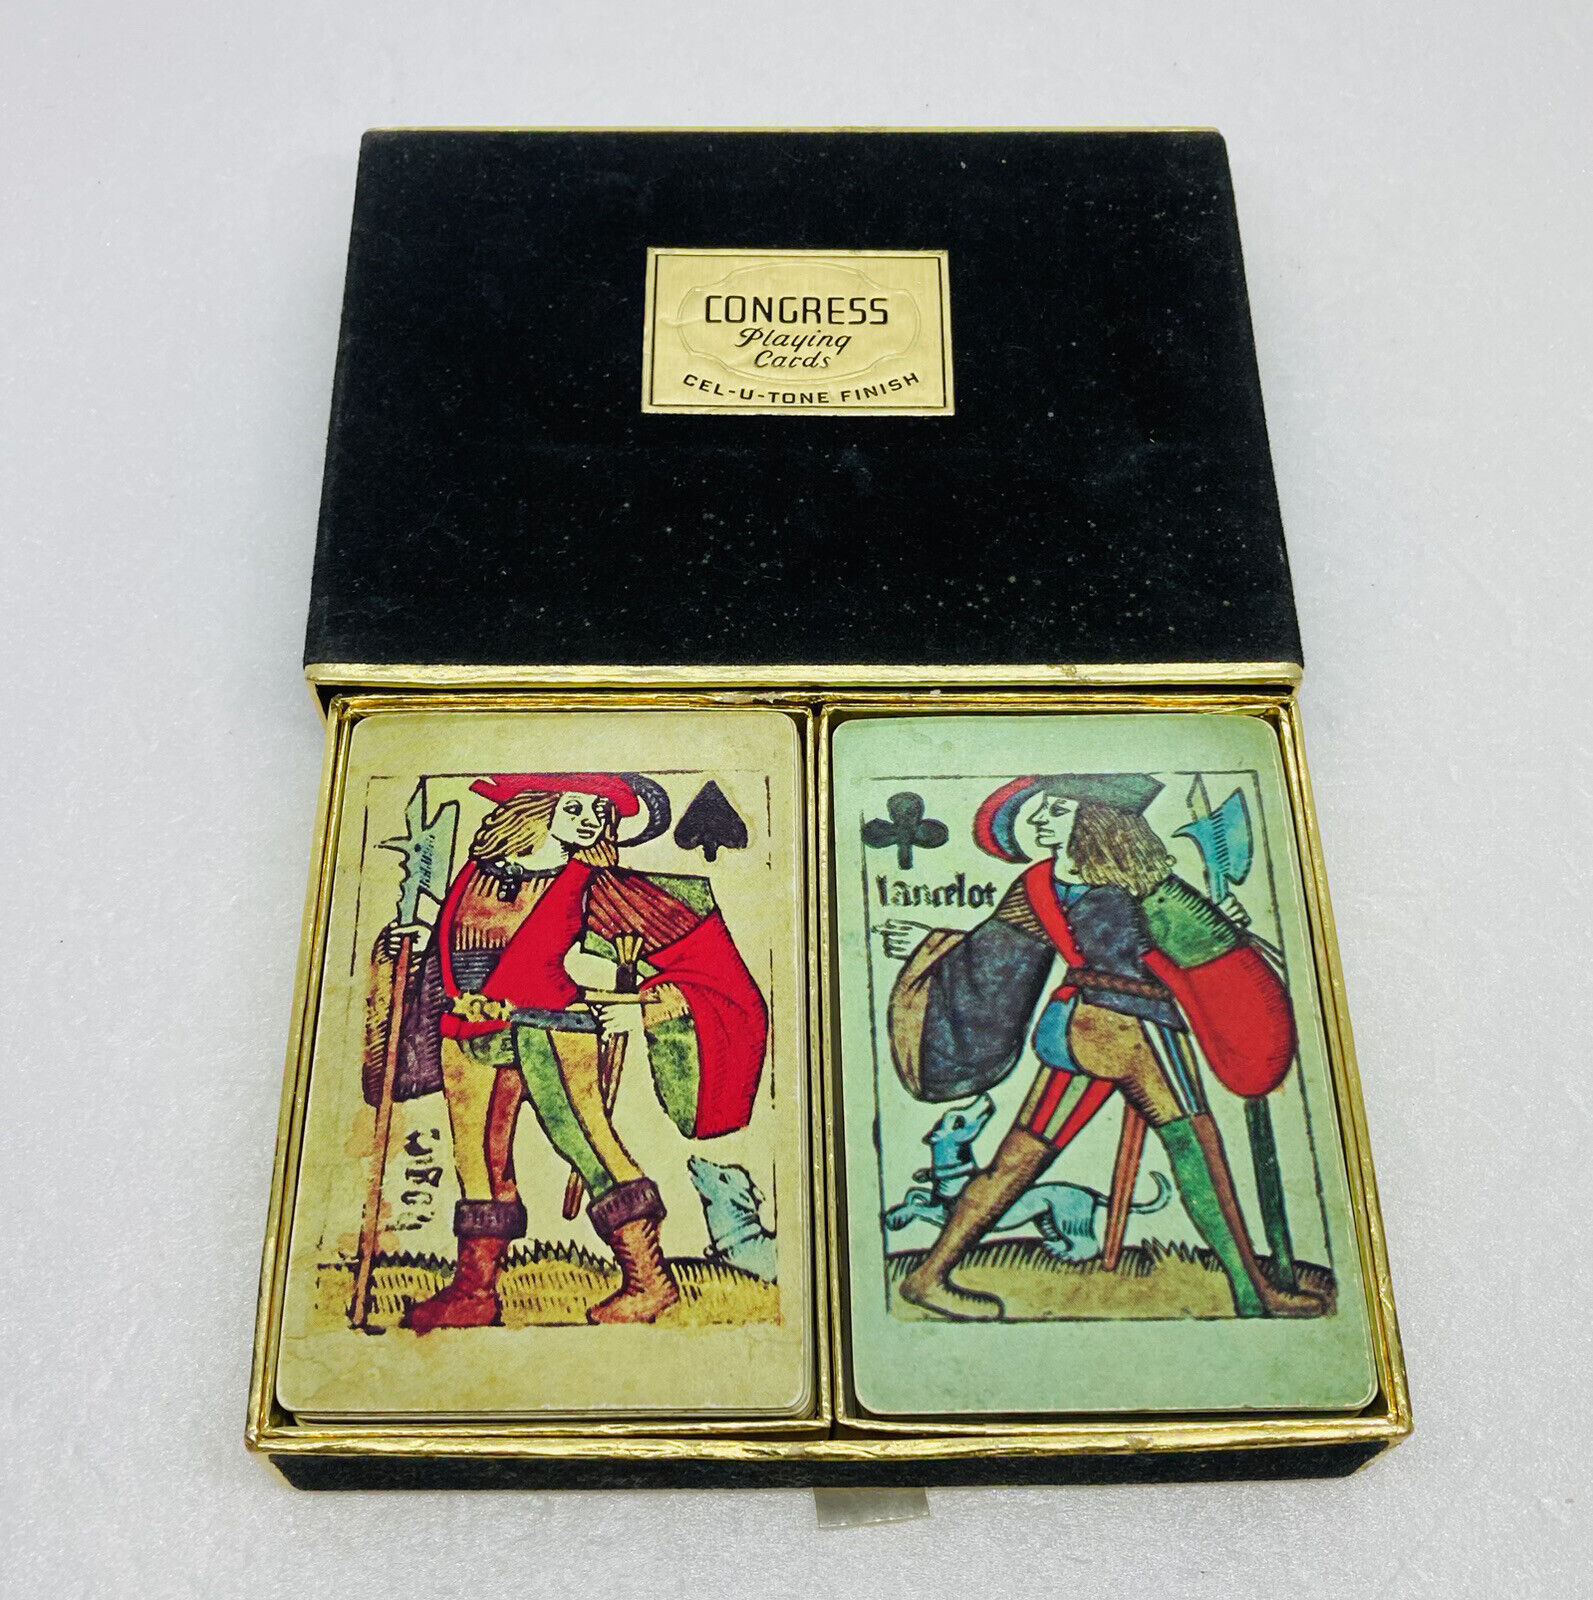 Vintage Congress Playing Cards Lancelot & Hager King and knight Art USA Made 10